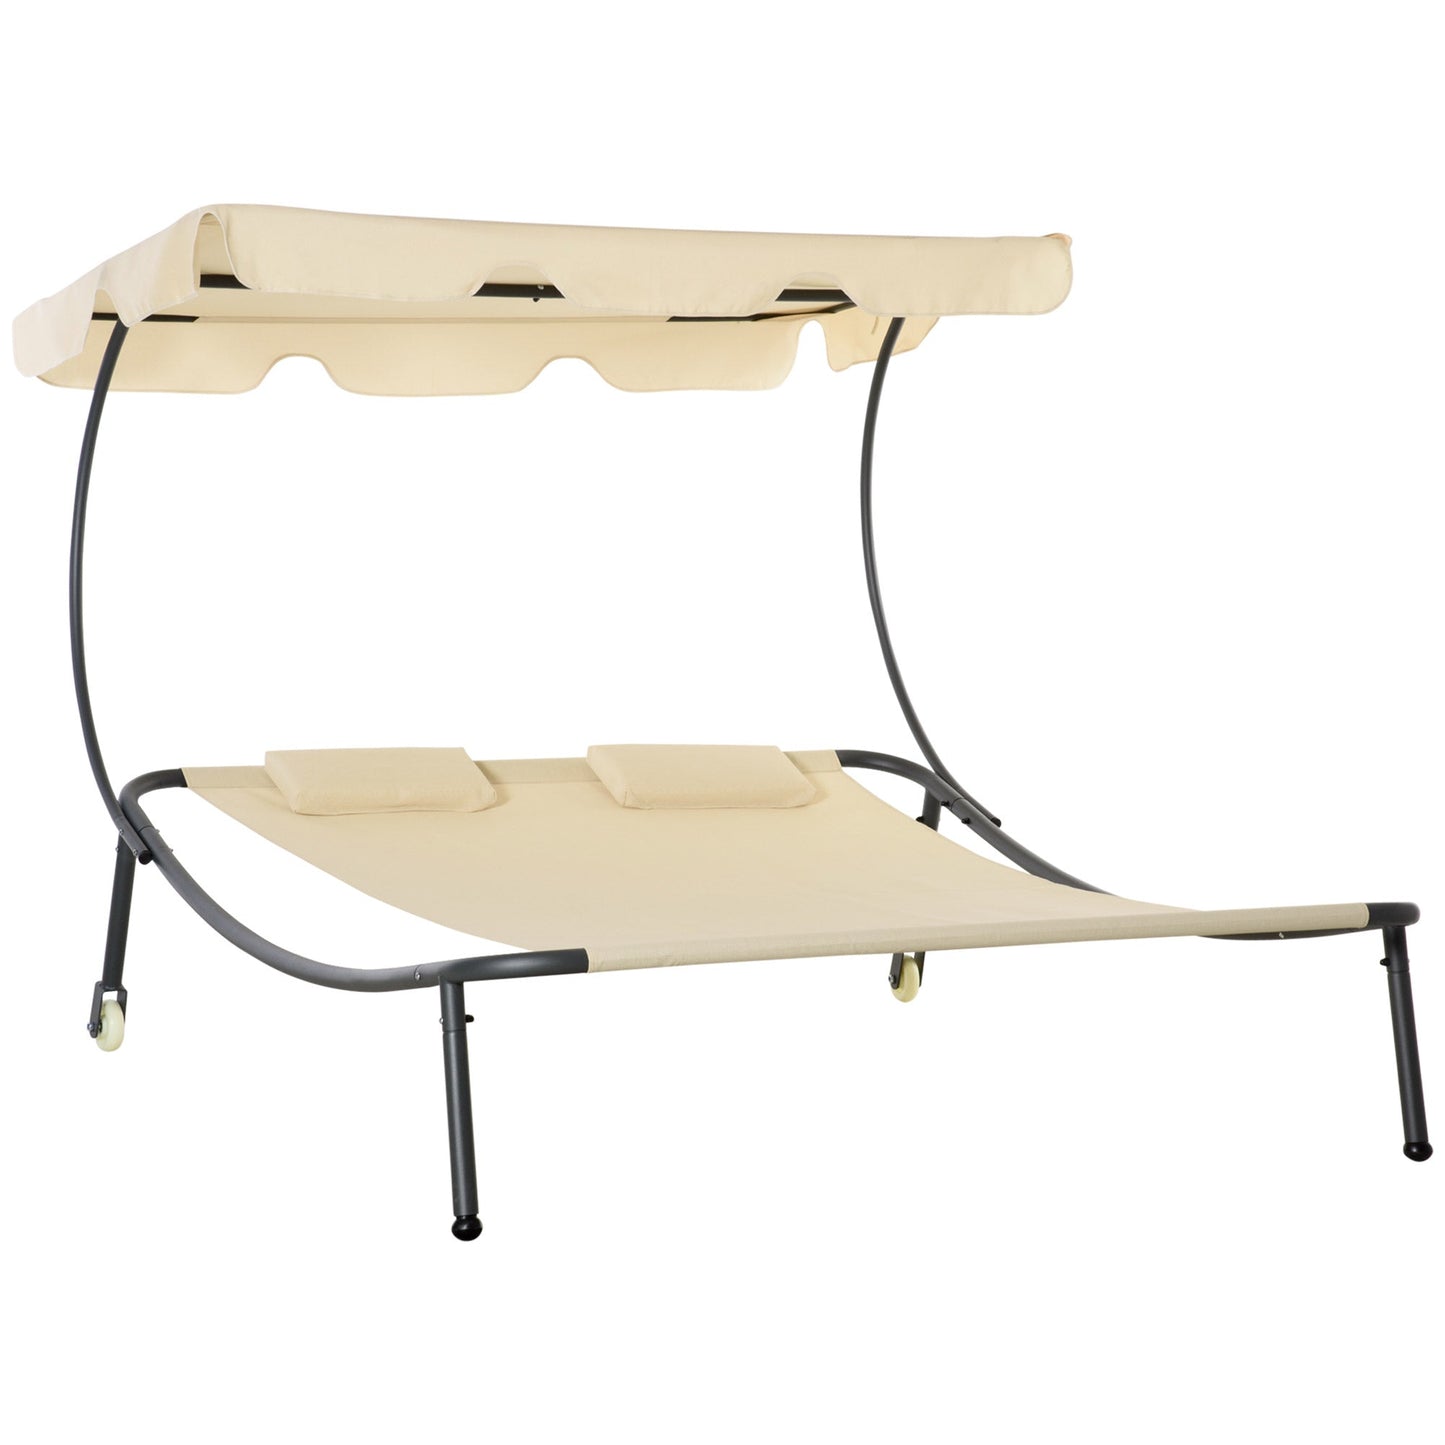 Outdoor and Garden-Double Chaise Lounge Chair Outdoor with Adjustable Canopy and Pillow, Hammock Bed Daybed for Patio, Garden, Poolside, Beige - Outdoor Style Company